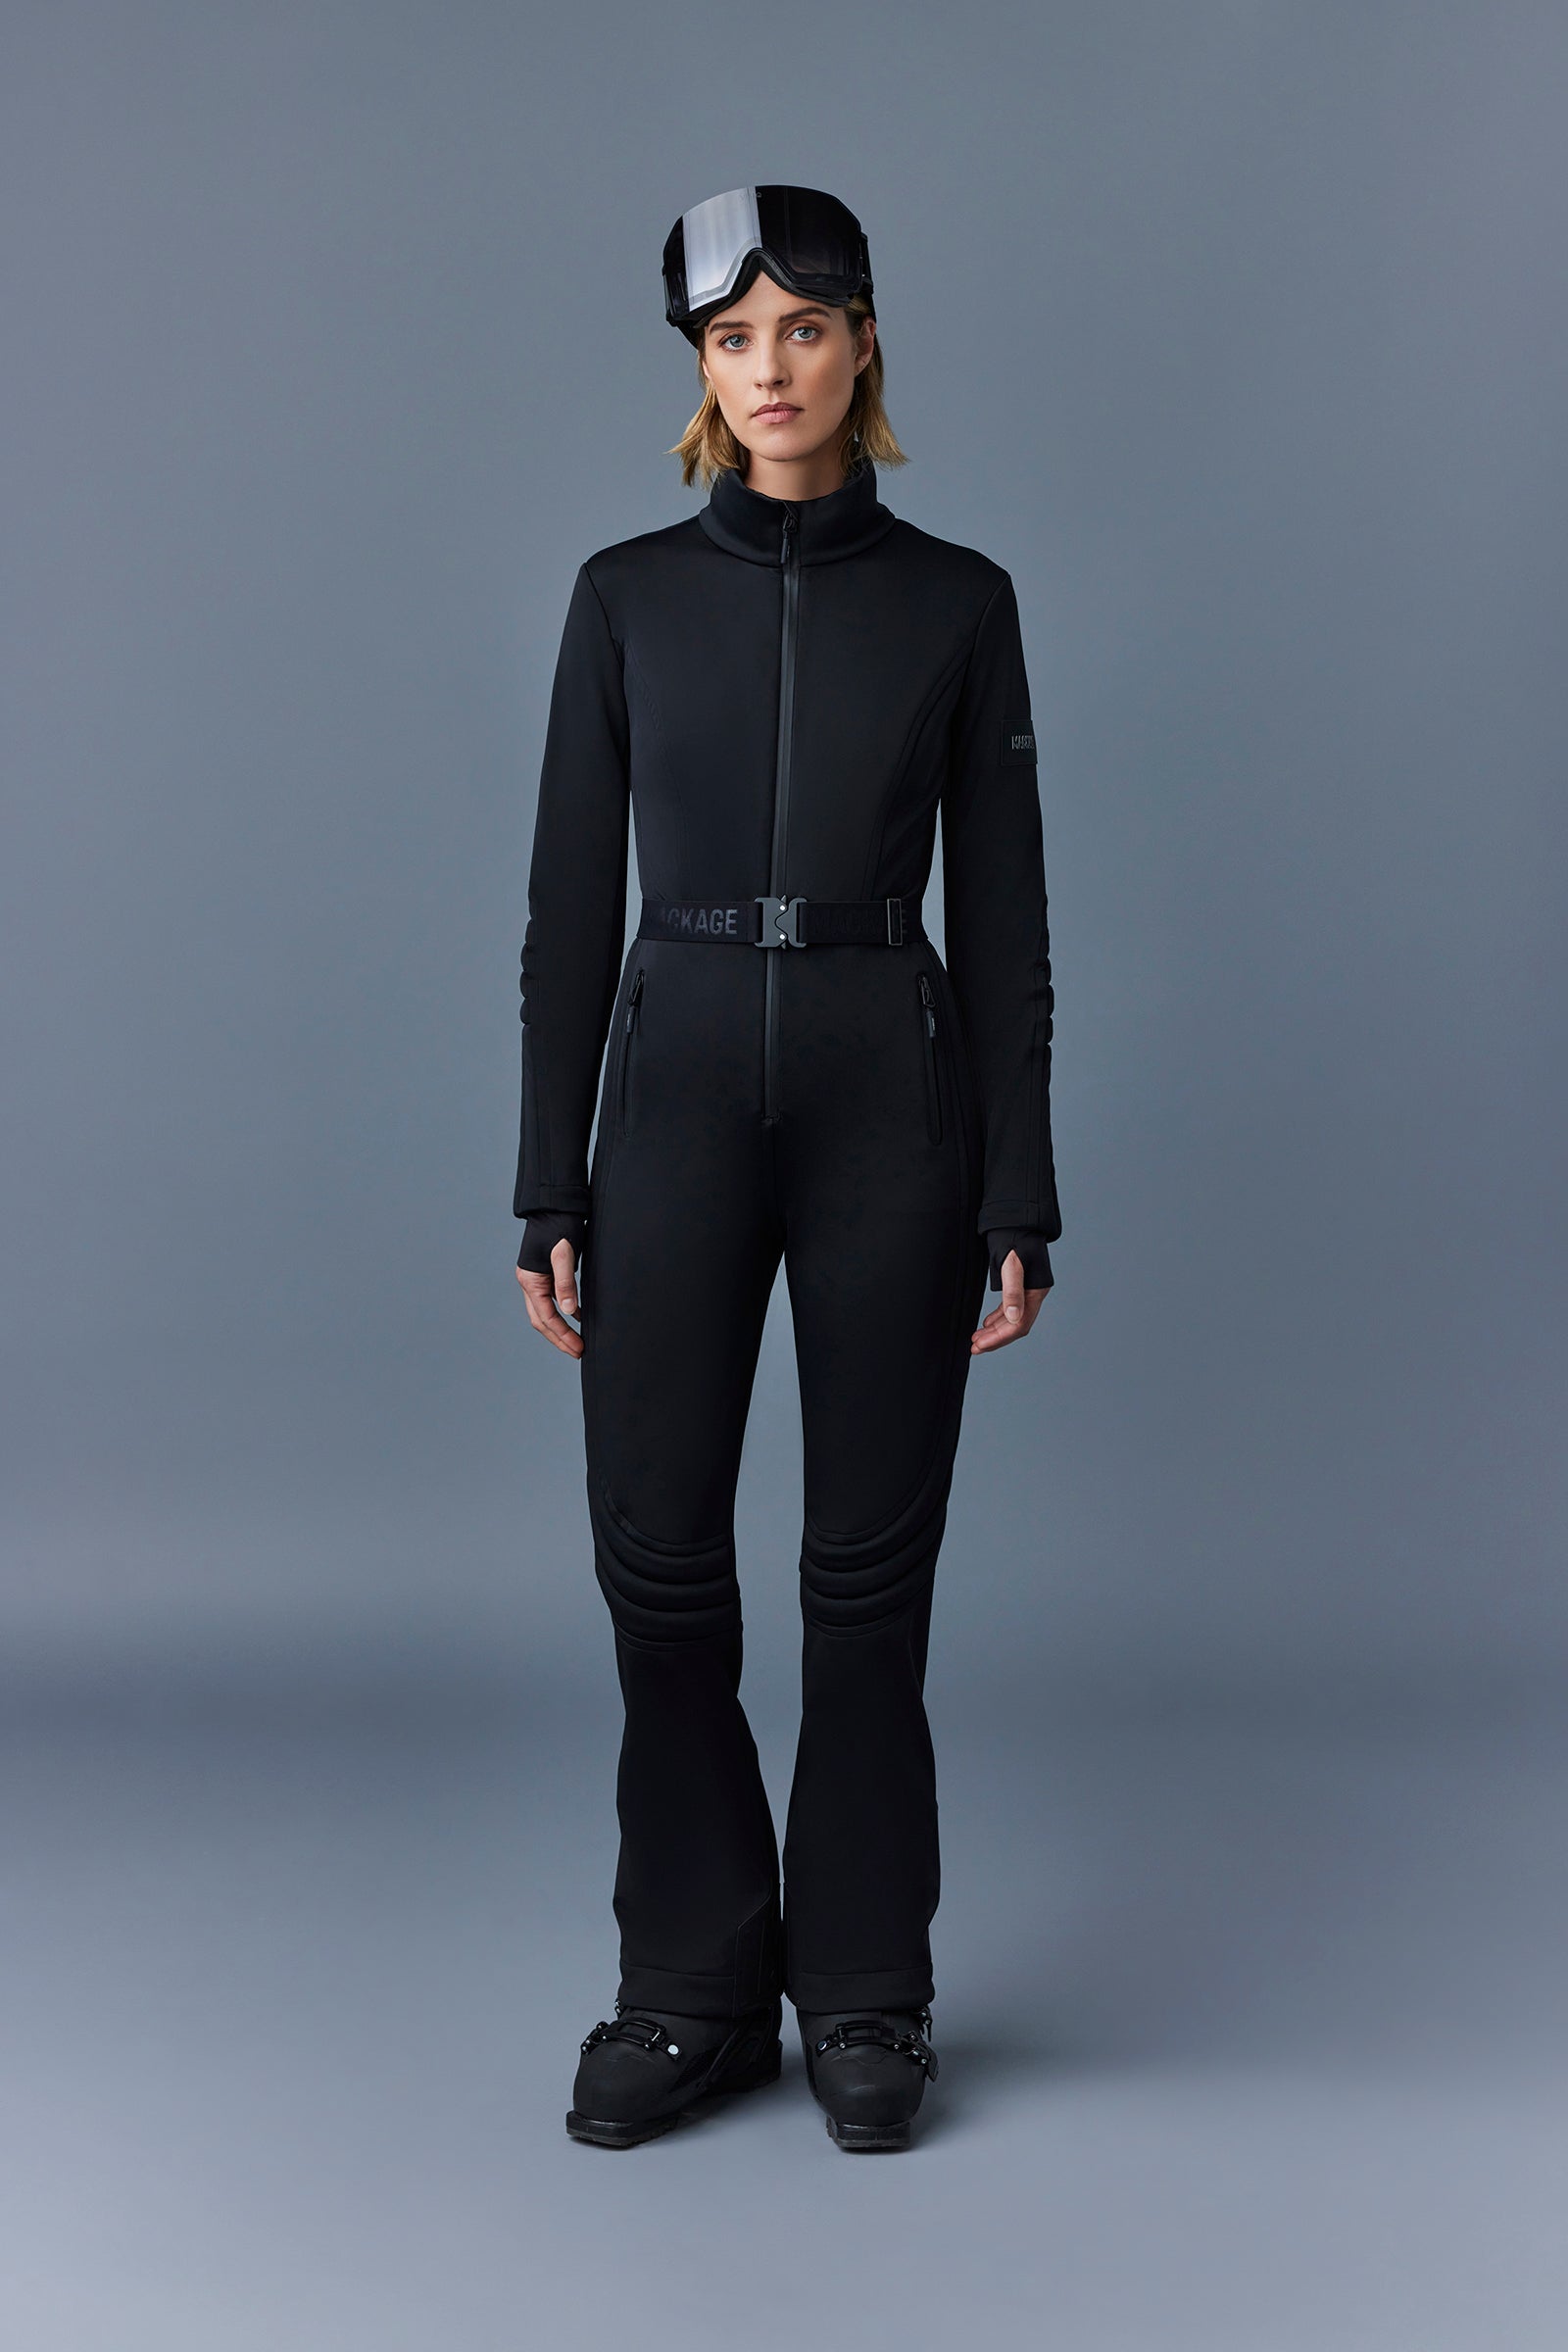 fleece | for and knees suit Shawna, US with Techno ski Mackage® sleeves articulated ladies